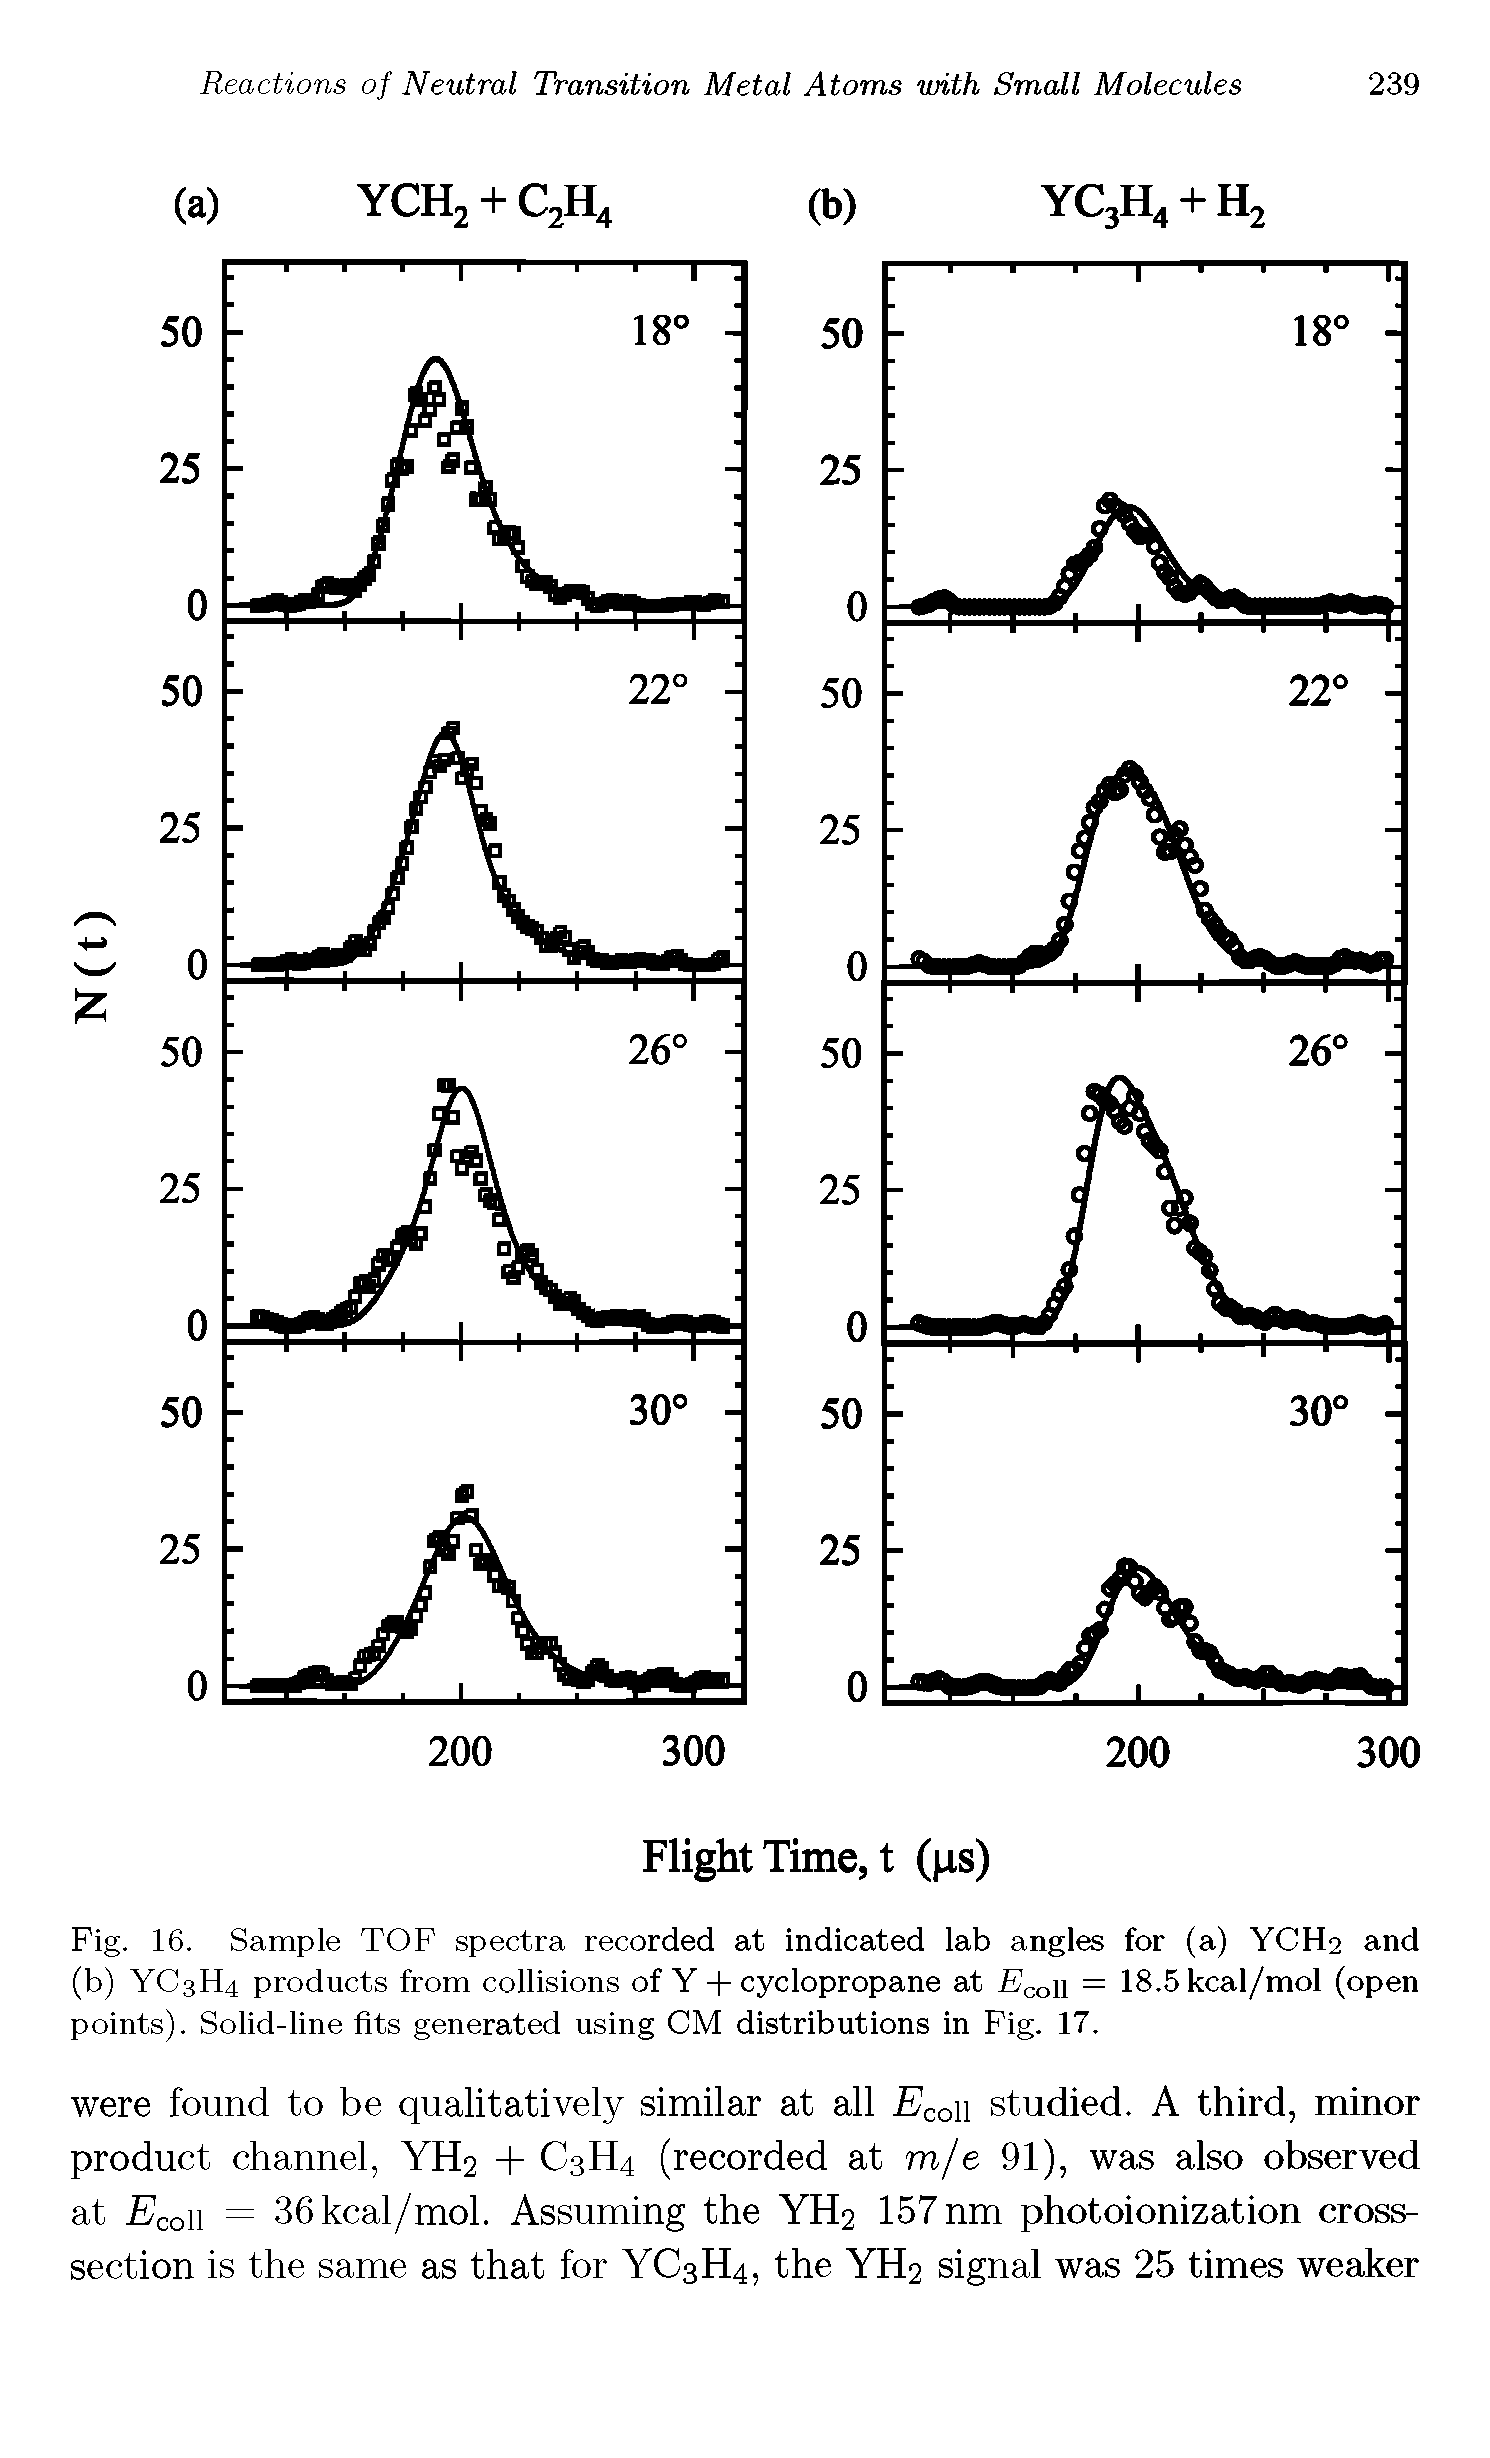 Fig. 16. Sample TOF spectra recorded at indicated lab angles for (a) YCH2 and (b) YC3H4 products from collisions of Y + cyclopropane at Econ = 18.5kcal/mol (open points). Solid-line fits generated using CM distributions in Fig. 17.